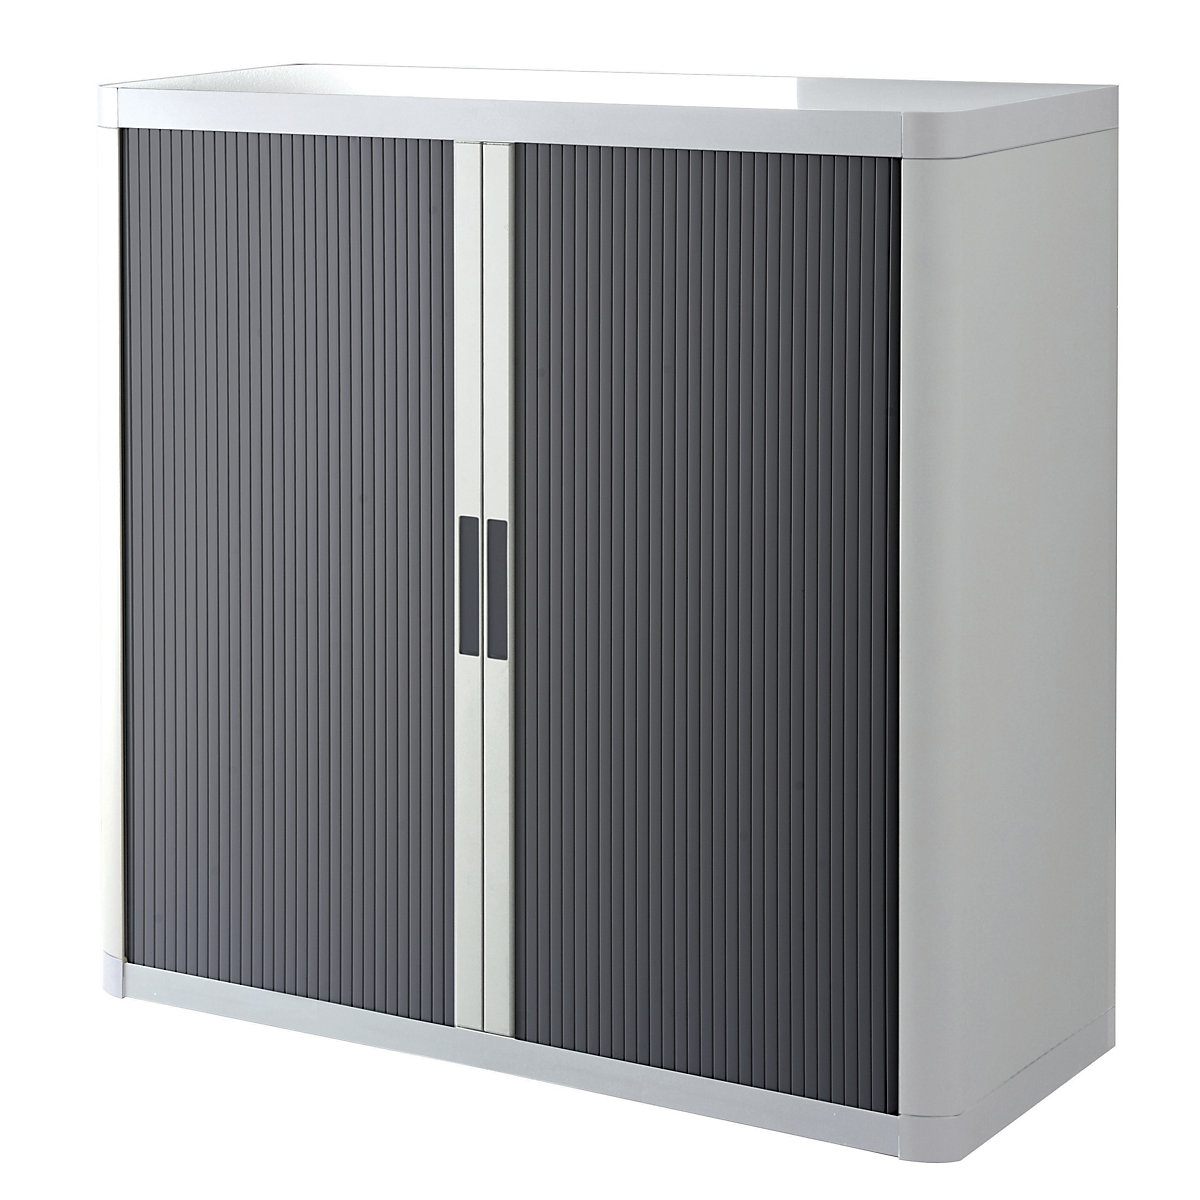 easyOffice® roller shutter cupboard – Paperflow, 2 shelves, height 1040 mm, white / charcoal-12